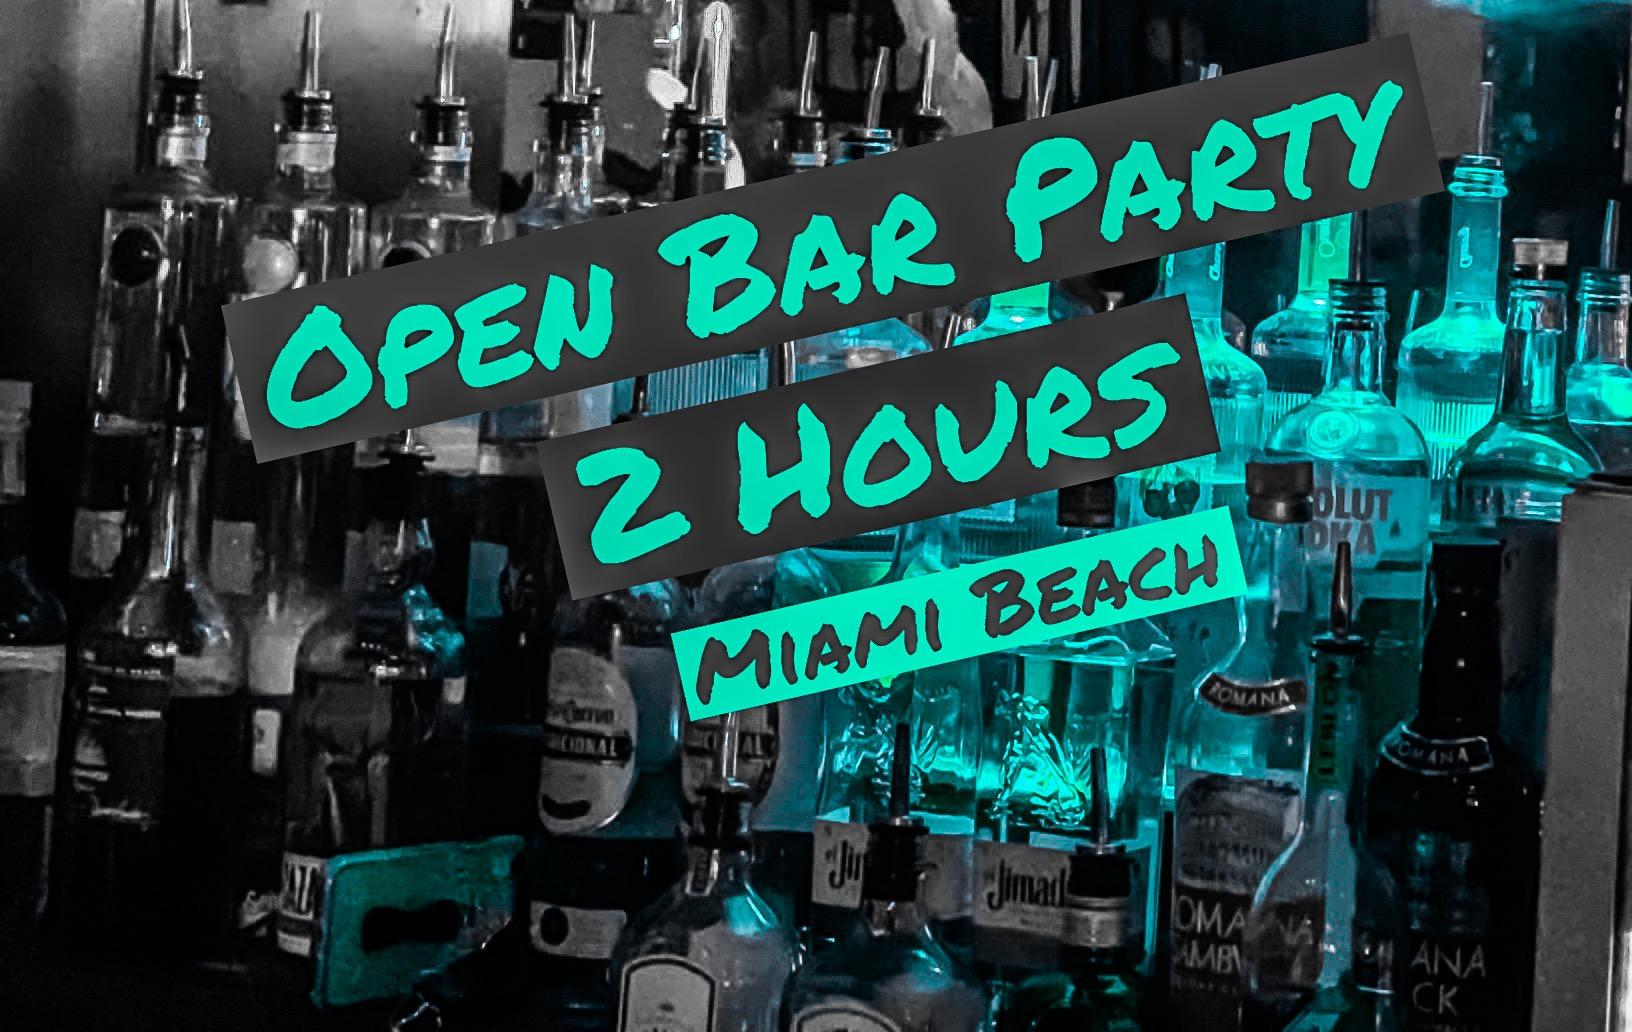 OPEN BAR 2 HRS - Unlimited Drinks in Miami Beach